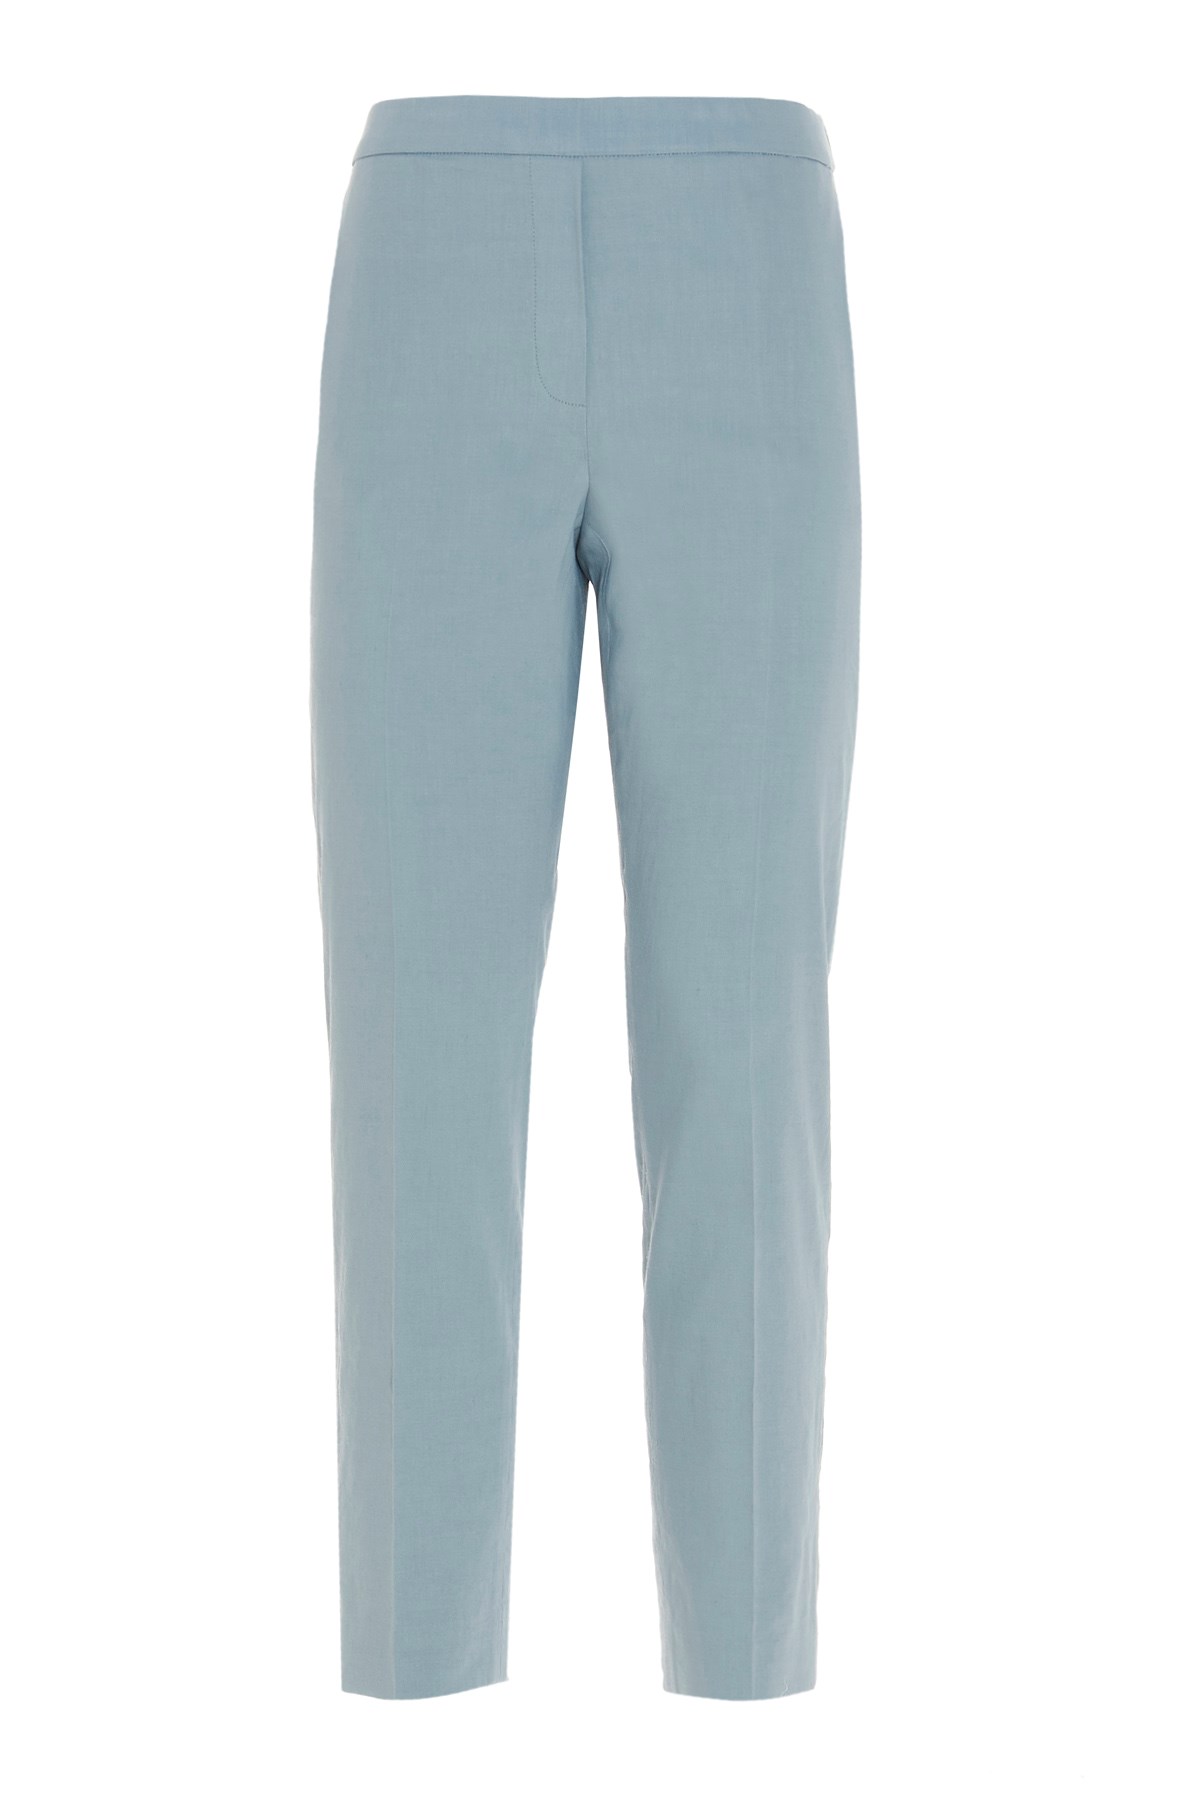 THEORY Linen Trousers